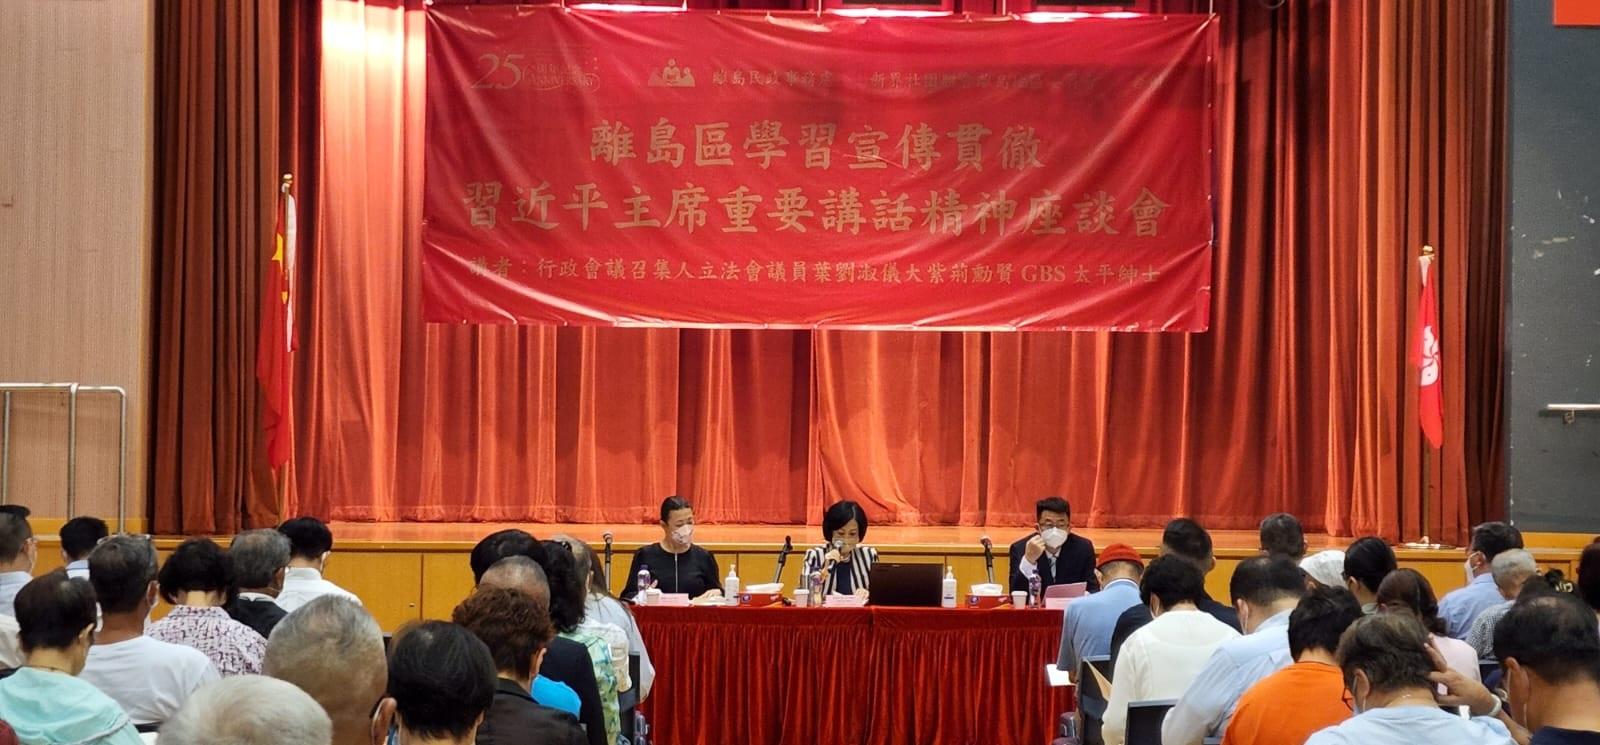 The Islands District Office, in collaboration with the New Territories Federation of Associations Islands District Committee, today (July 15) jointly held the "Session to Learn About, Promote and Implement the Spirit of President Xi's Important Speech" at Tung Chung Community Hall. Photo shows Convenor of the Executive Council and Member of the Legislative Council Mrs Regina Ip (centre) speaking at the session. Next to her is the District Officer (Islands), Miss Amy Yeung (first left), and the Deputy Director General of the New Territories Sub-office of the Liaison Office of the Central People's Government in the Hong Kong Special Administrative Region, Mr Hu Qiming (first right).